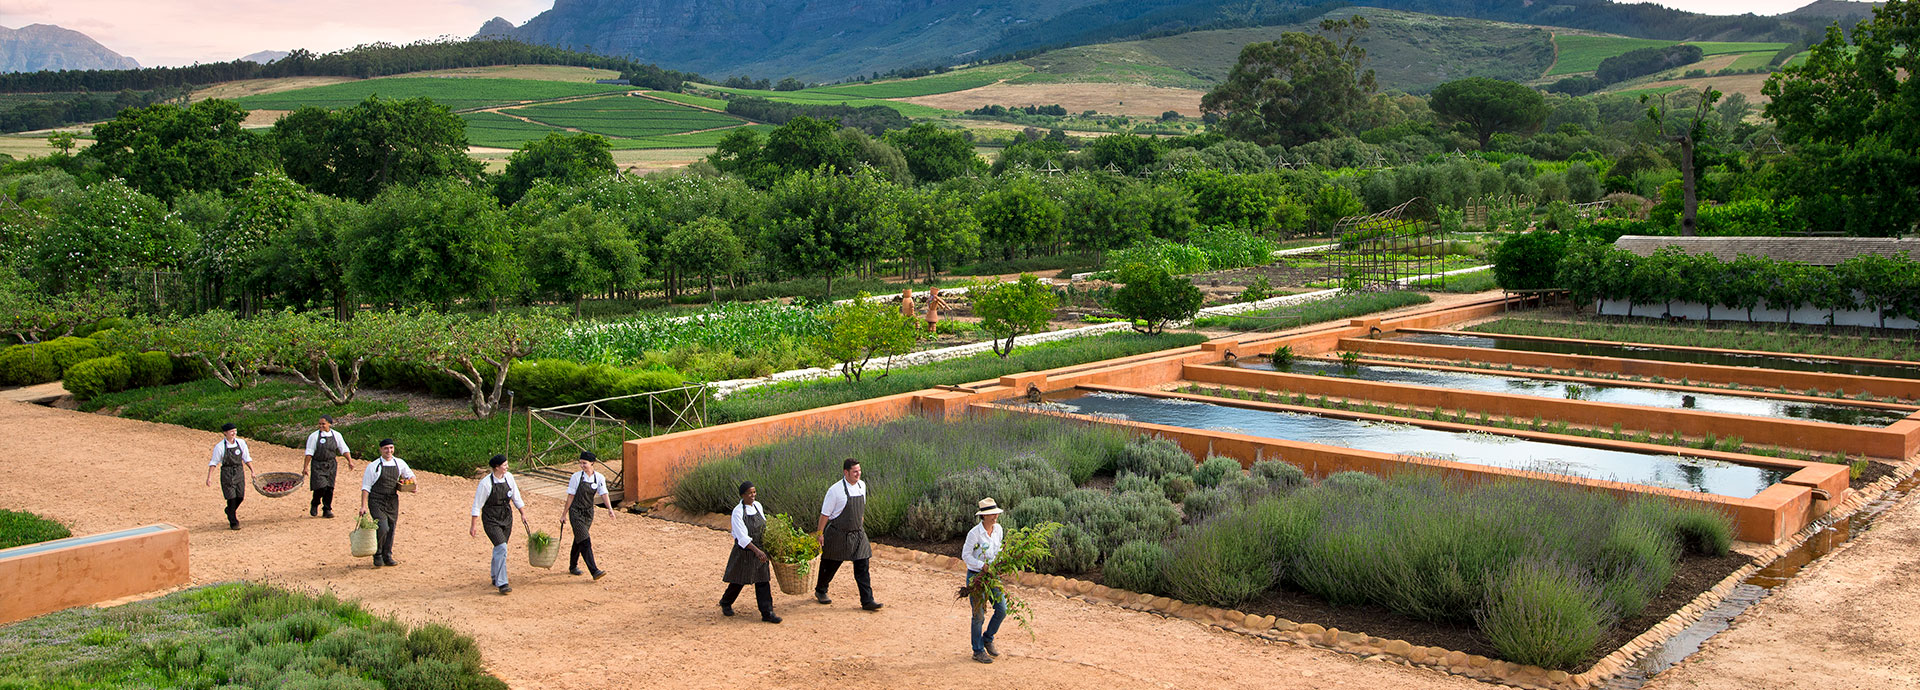 Gourmet food in the Cape Winelands South Africa - a herb garden like no other beside Babel Restaurant